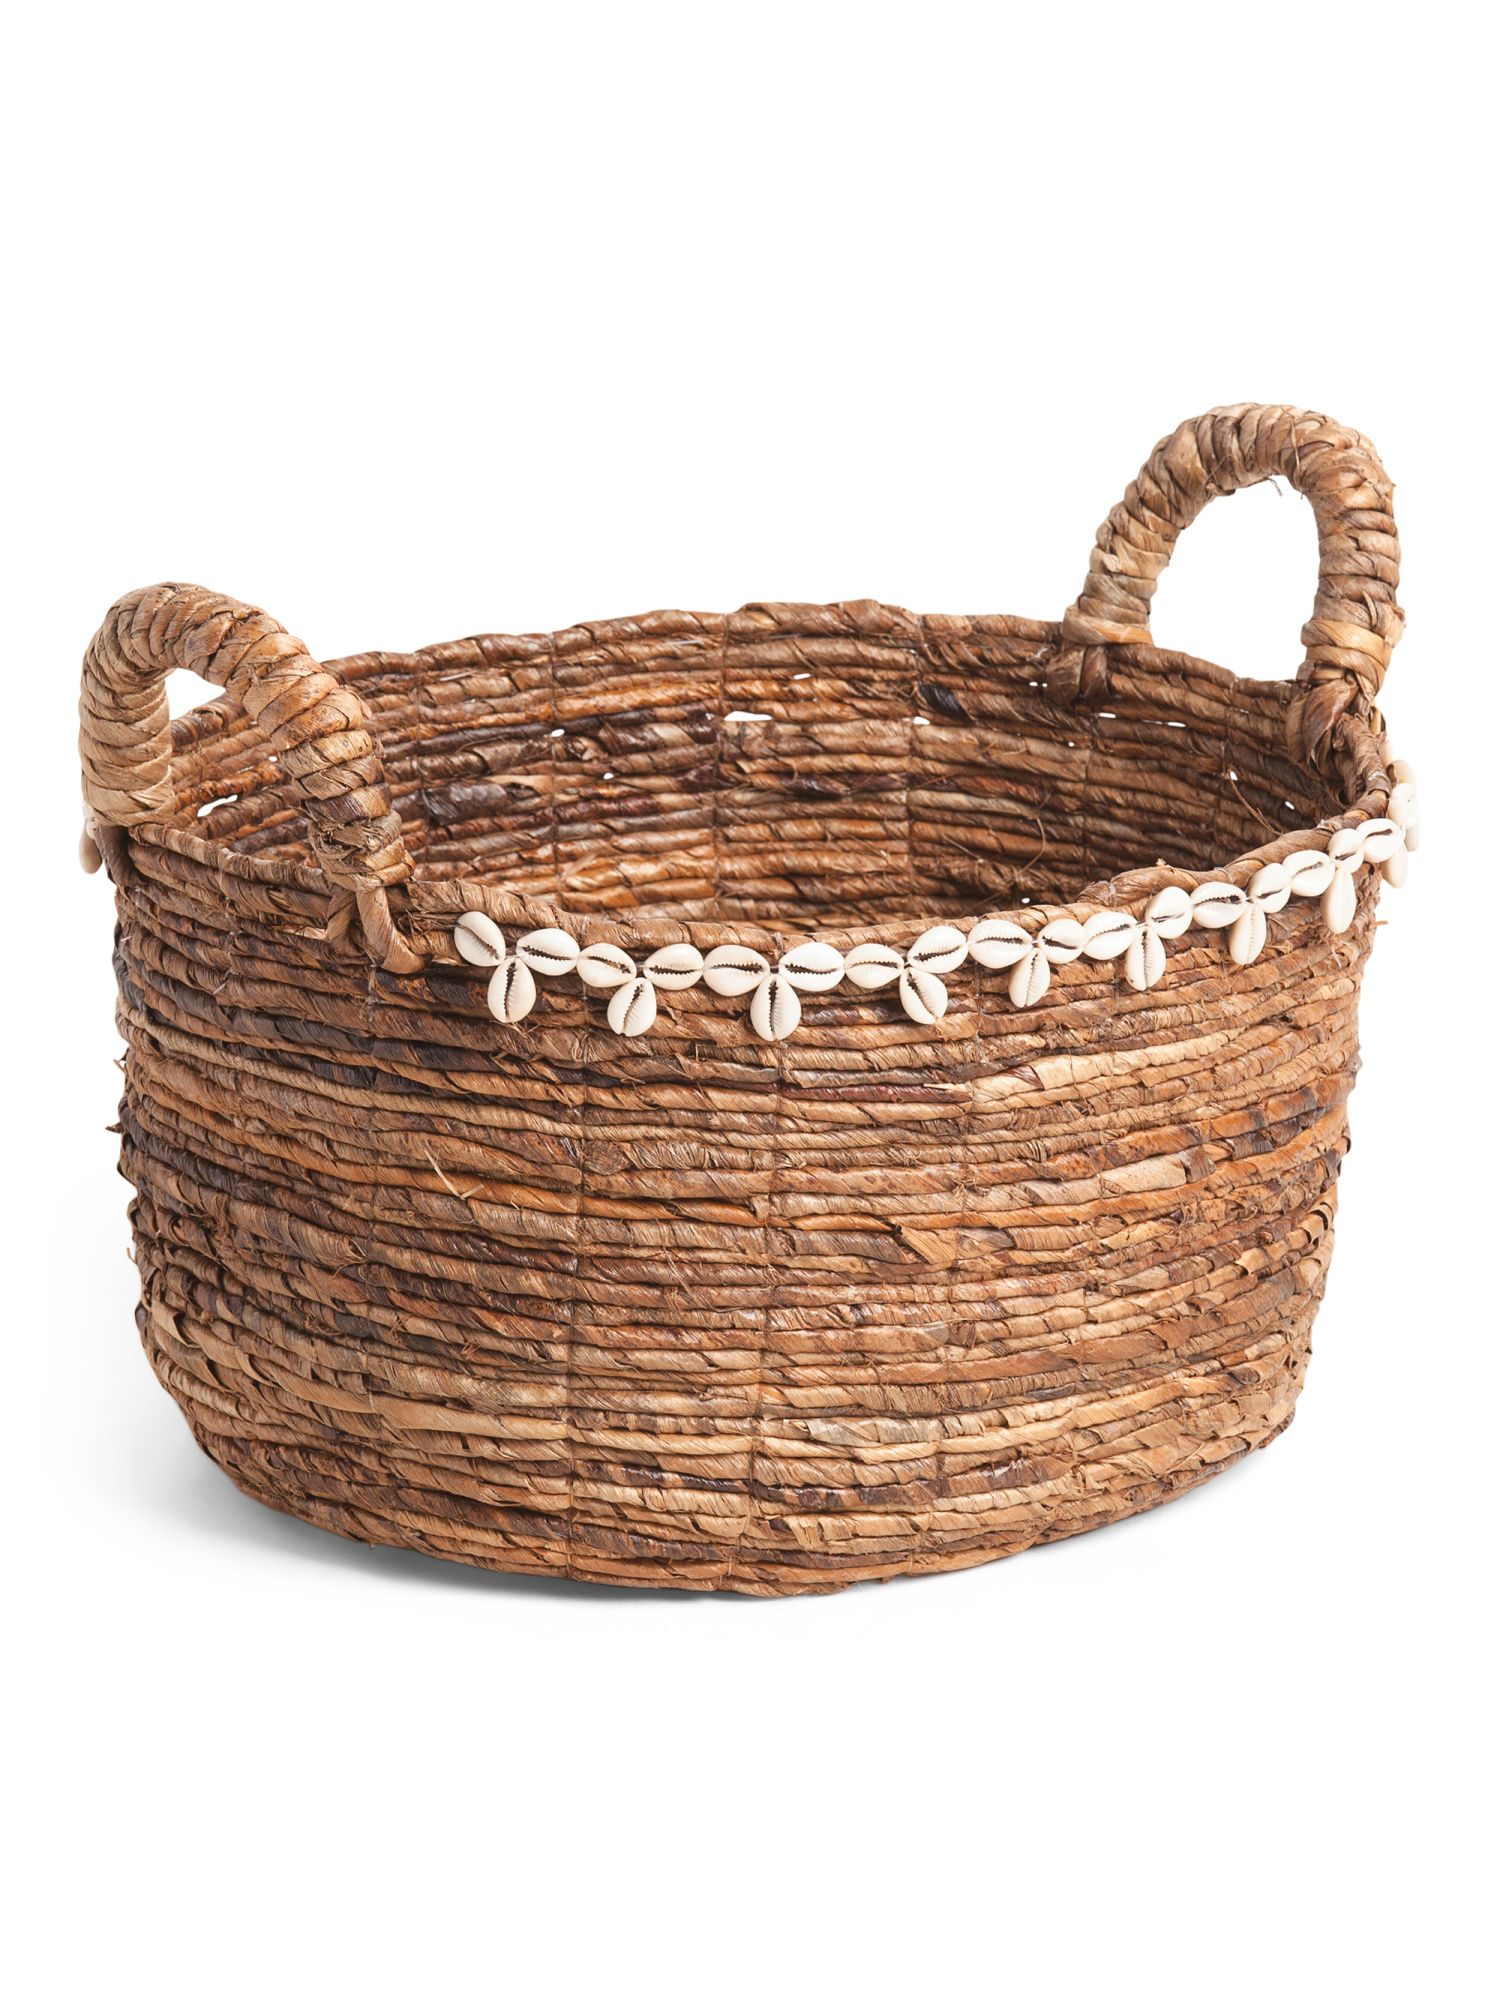 Medium Natural Oval Basket With Shell Detail | TJ Maxx